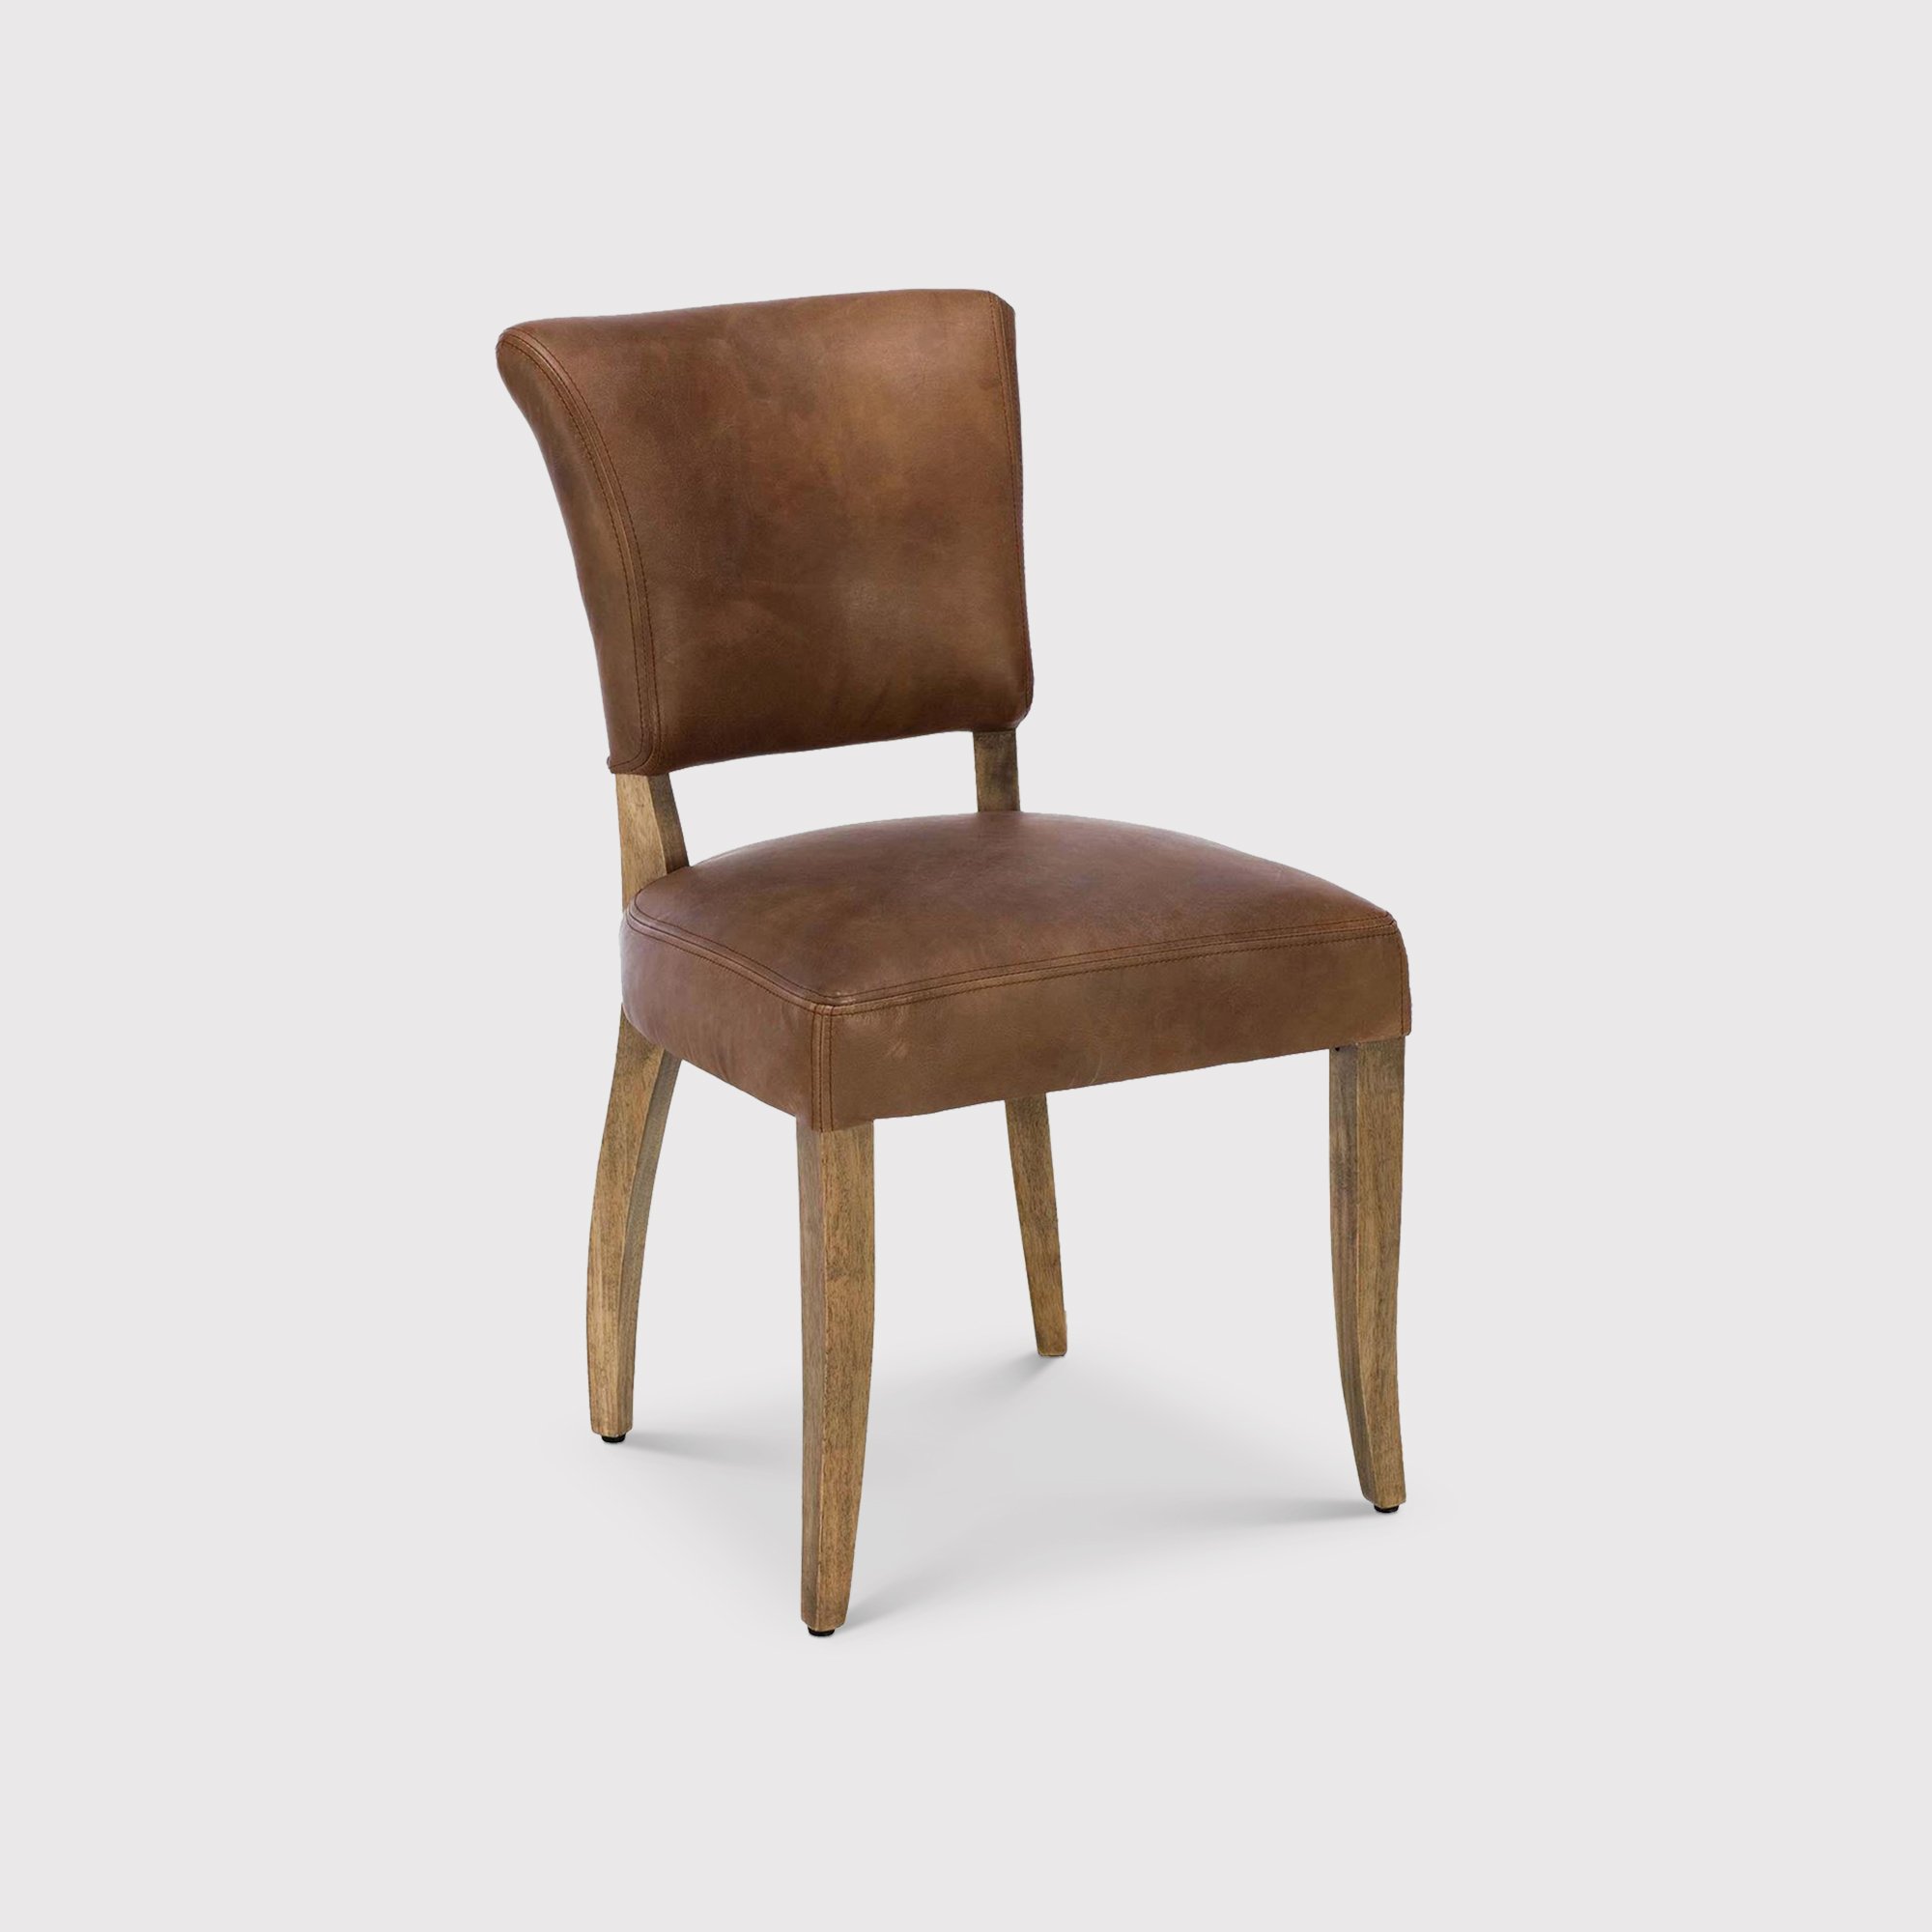 Timothy Oulton Mimi Dining Chair, Brown Leather | Barker & Stonehouse